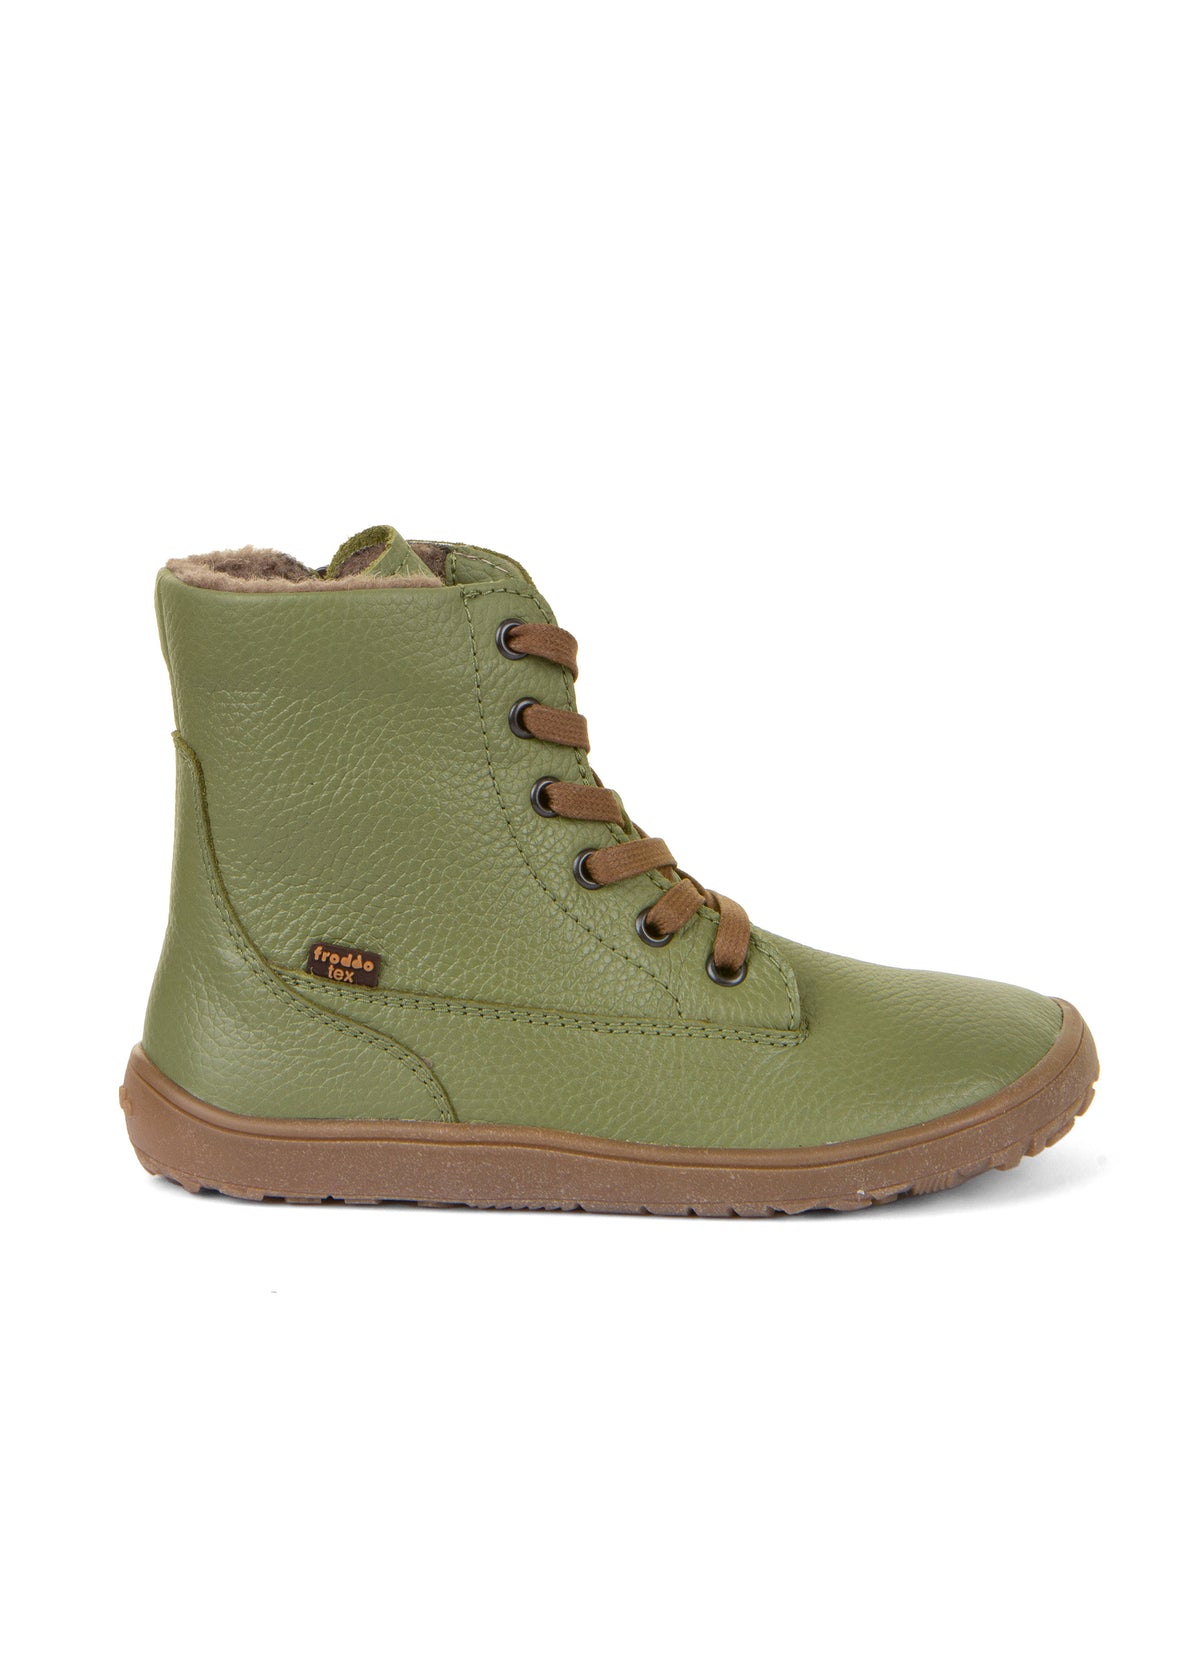 Barefoot shoes - leather winter shoes, TEX Laces - olive green